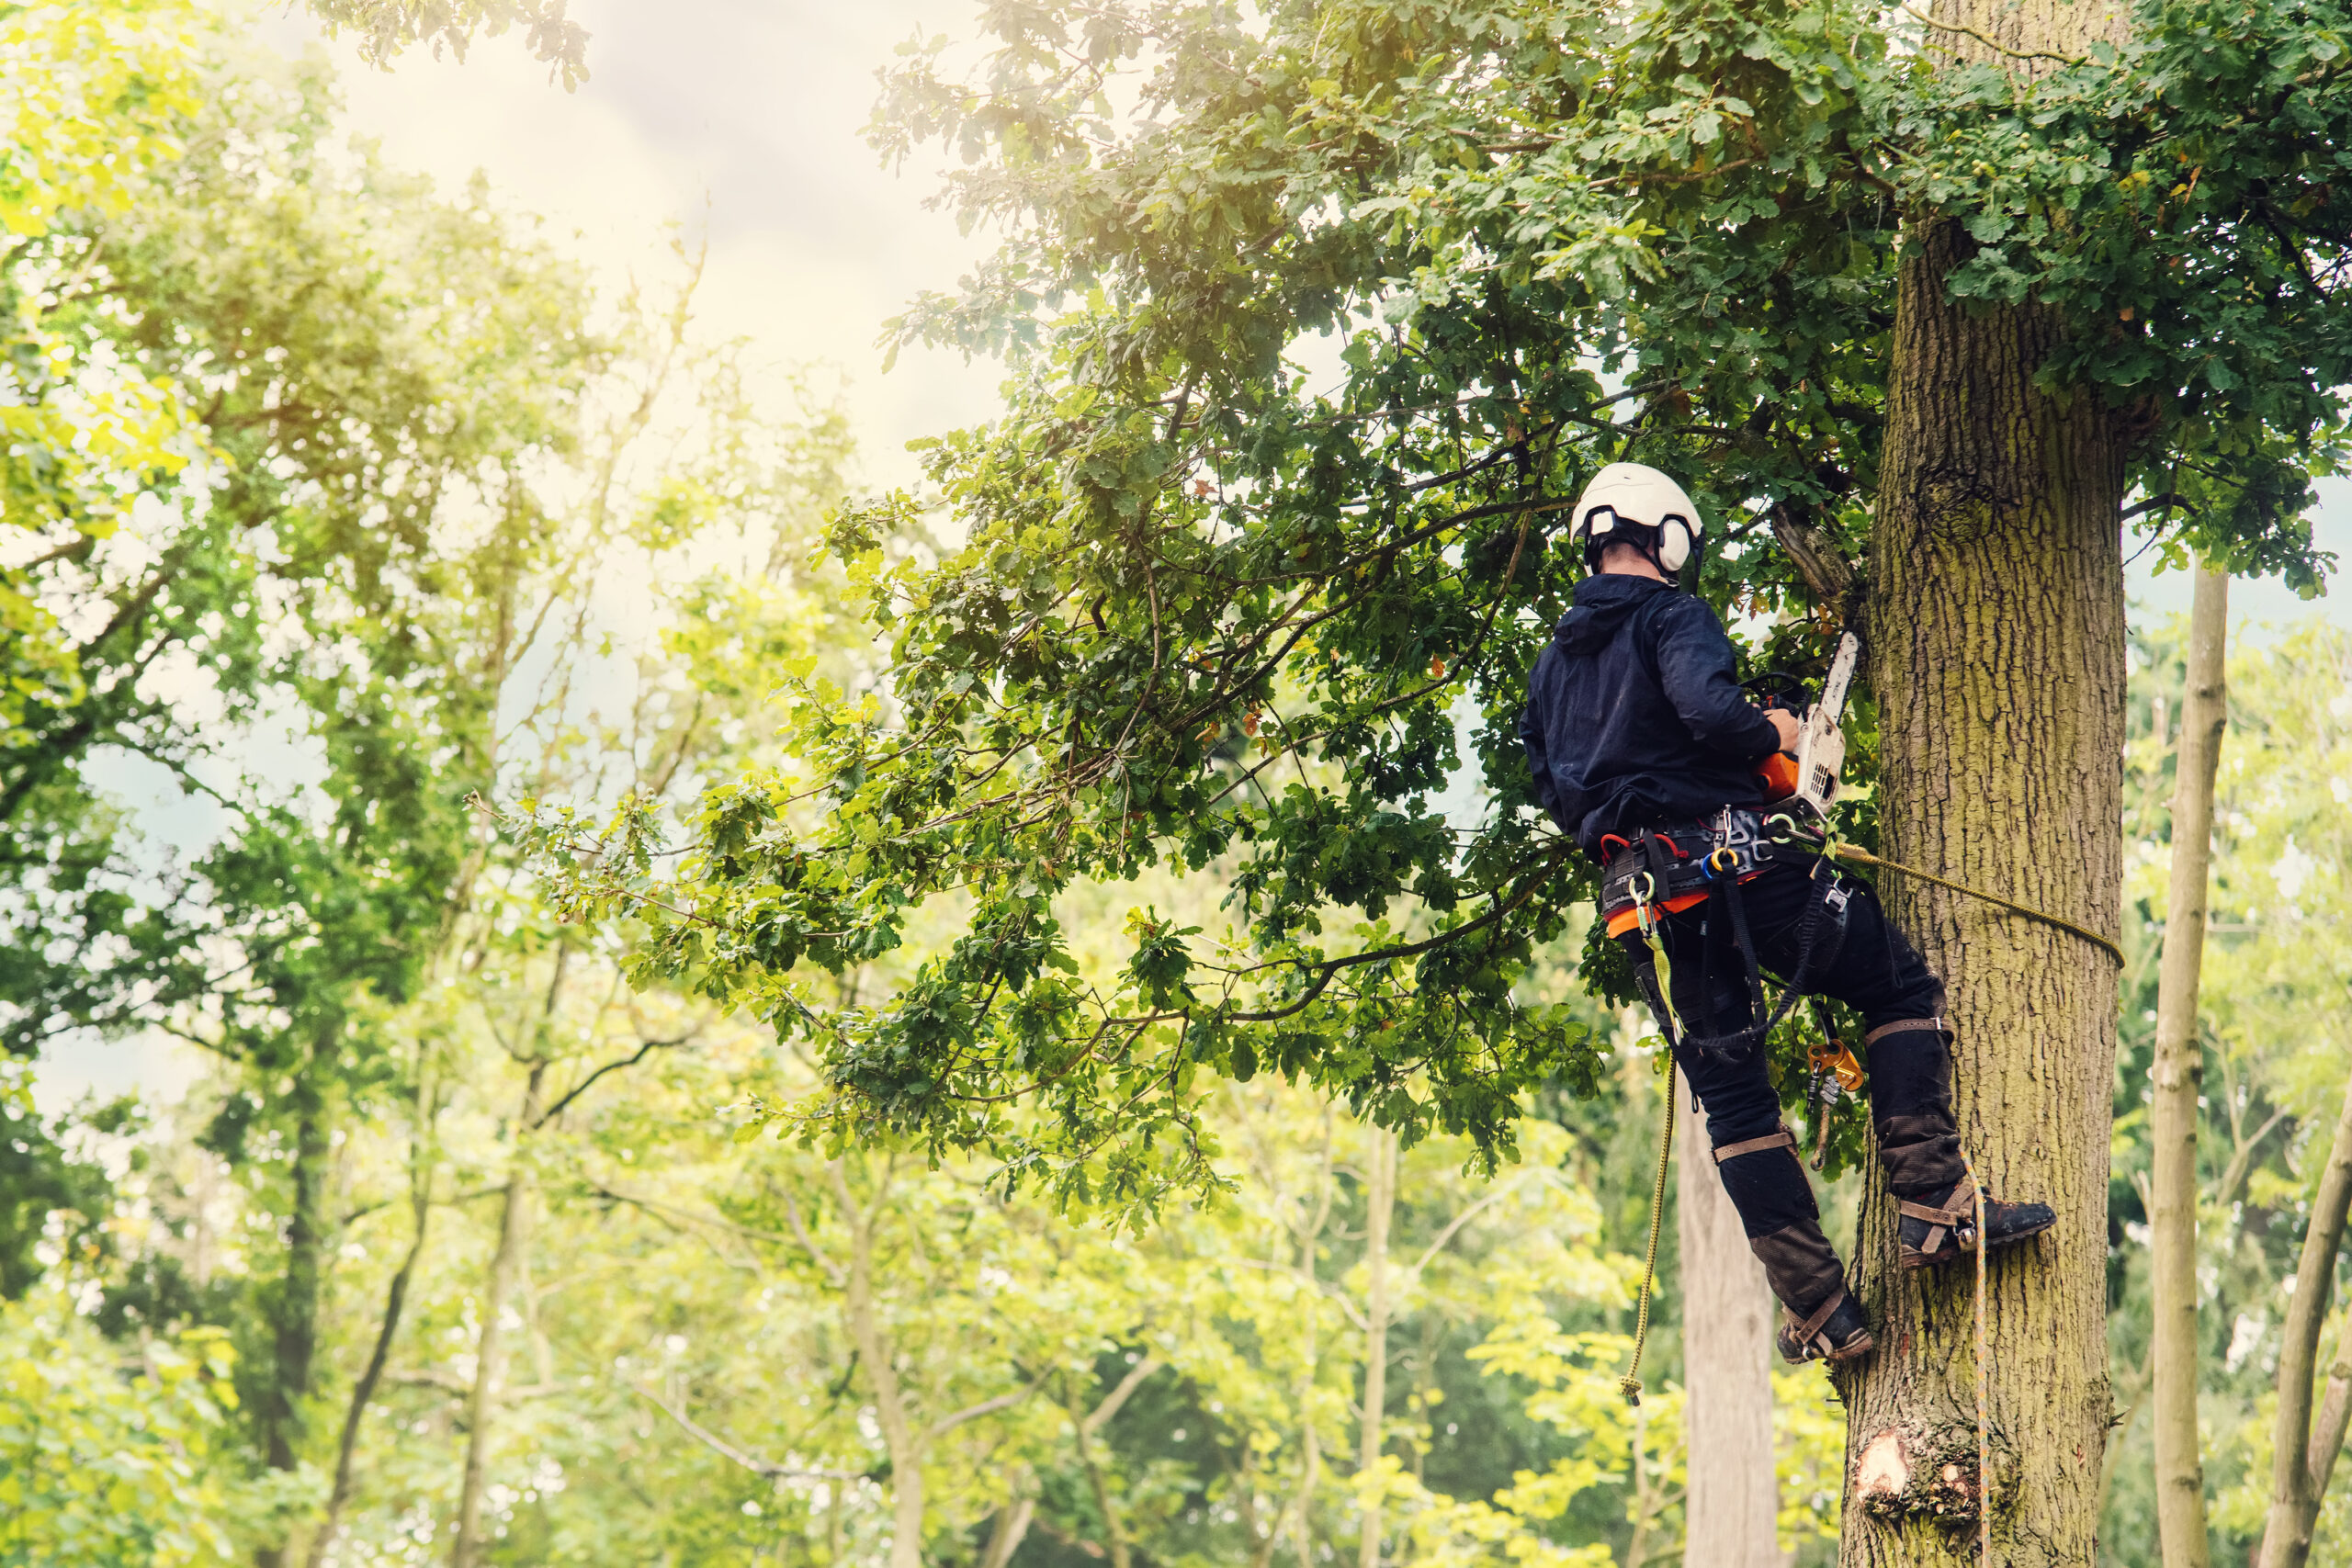 Tree Service in Round Rock and Austin Debunks Tree Removal Myths